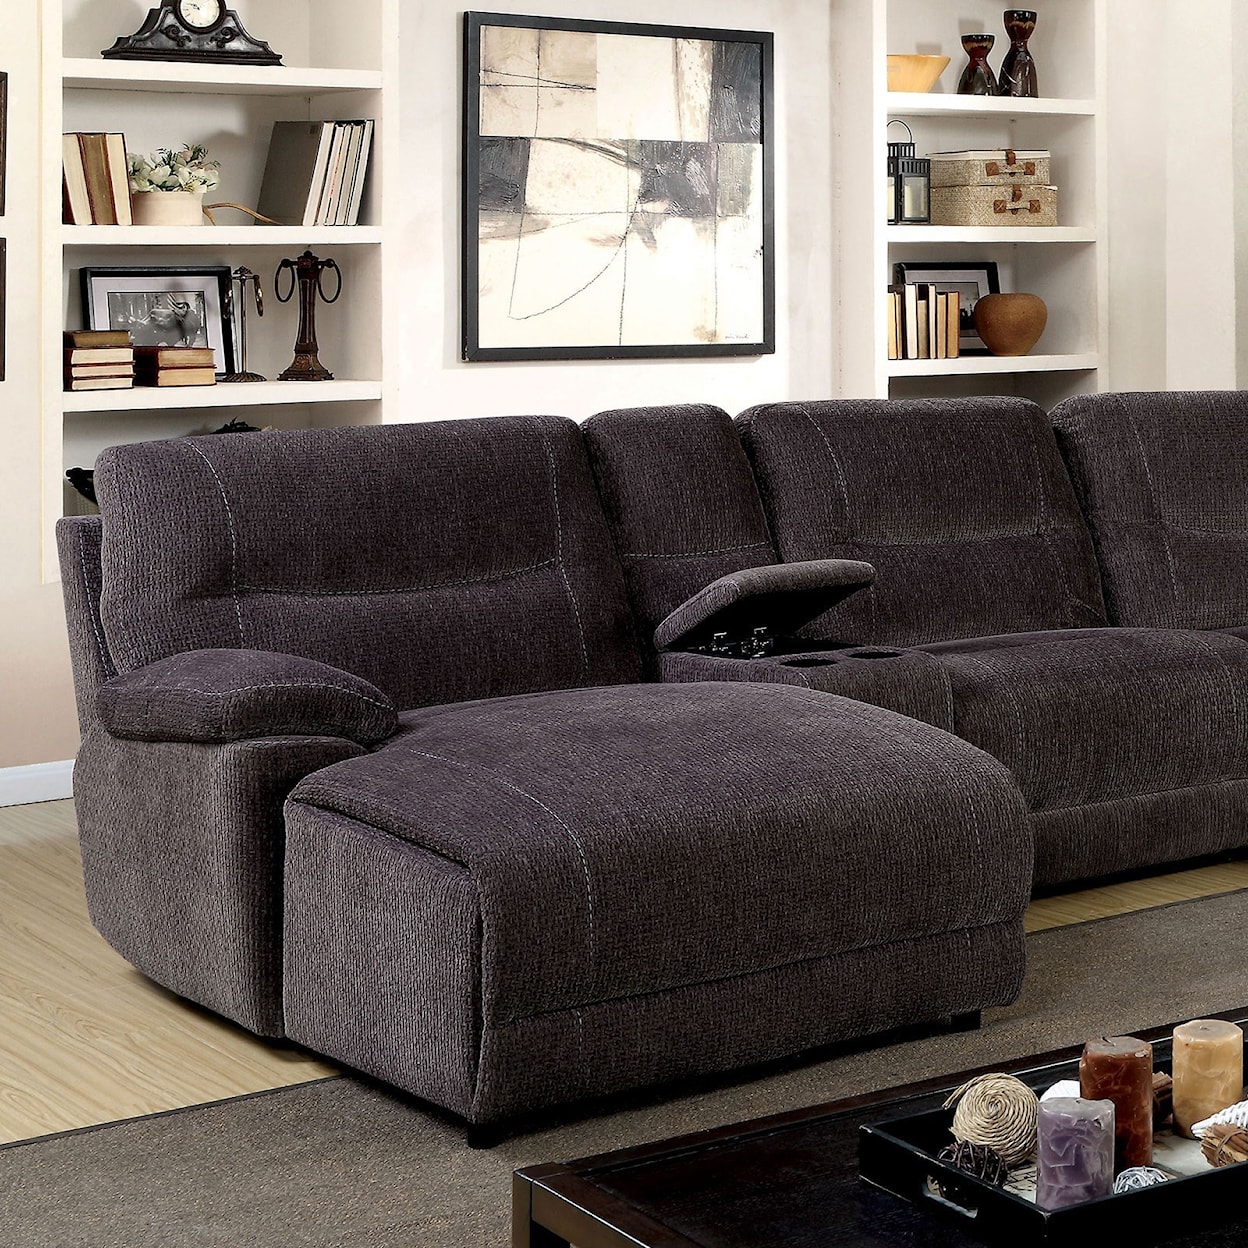 Furniture of America Karlee II Sectional with Console